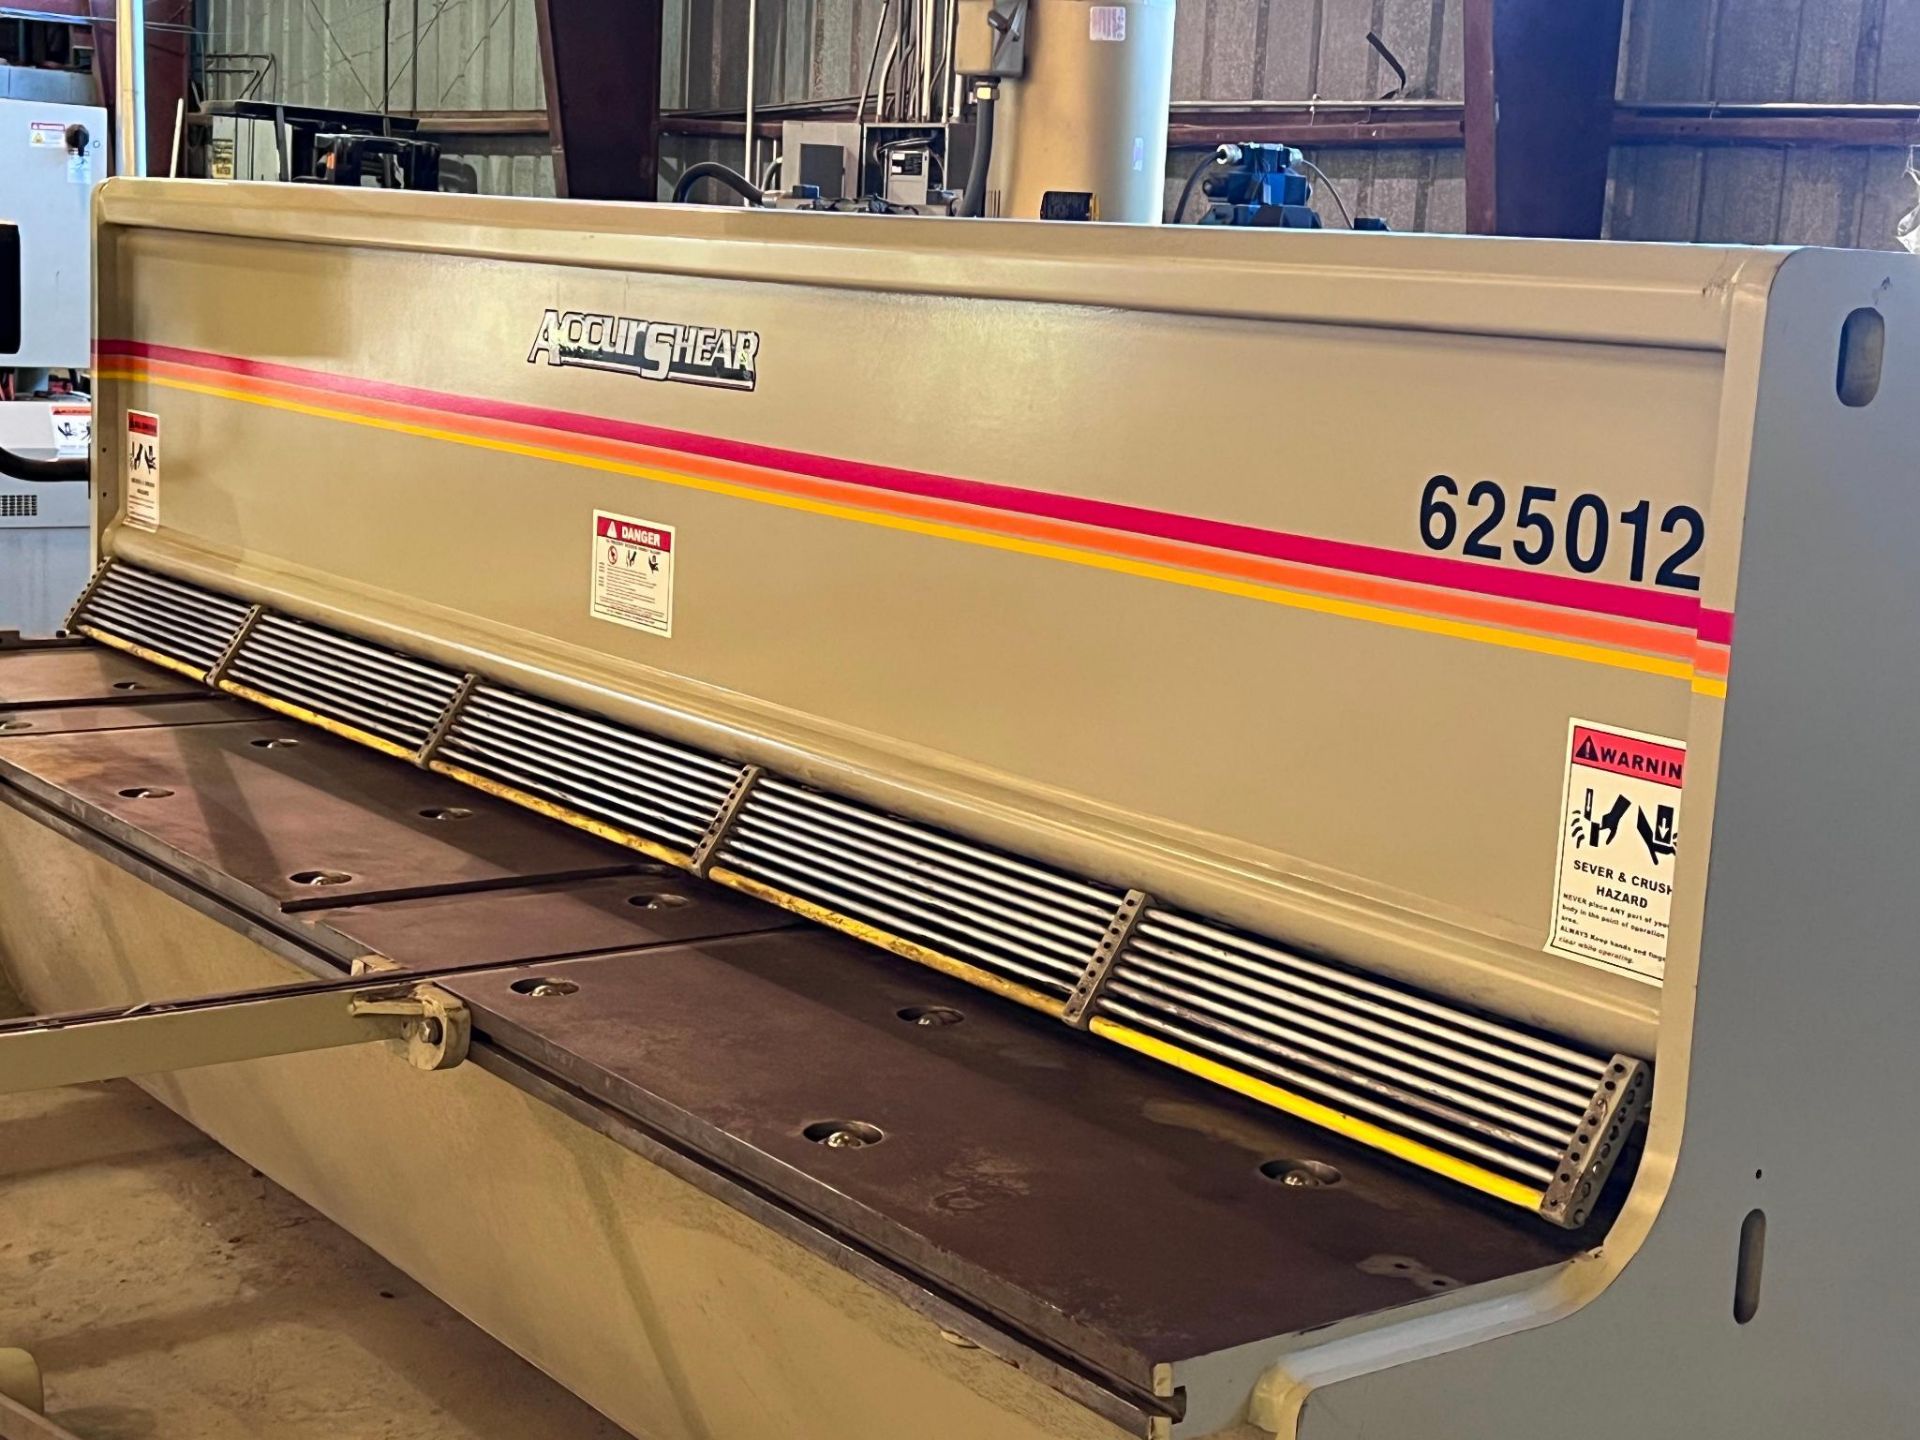 2019 Accurshear 625012 Hydraulic Power Squaring Shear Serial Number 7281 Thickness: .25" Mild Steel - Image 3 of 29